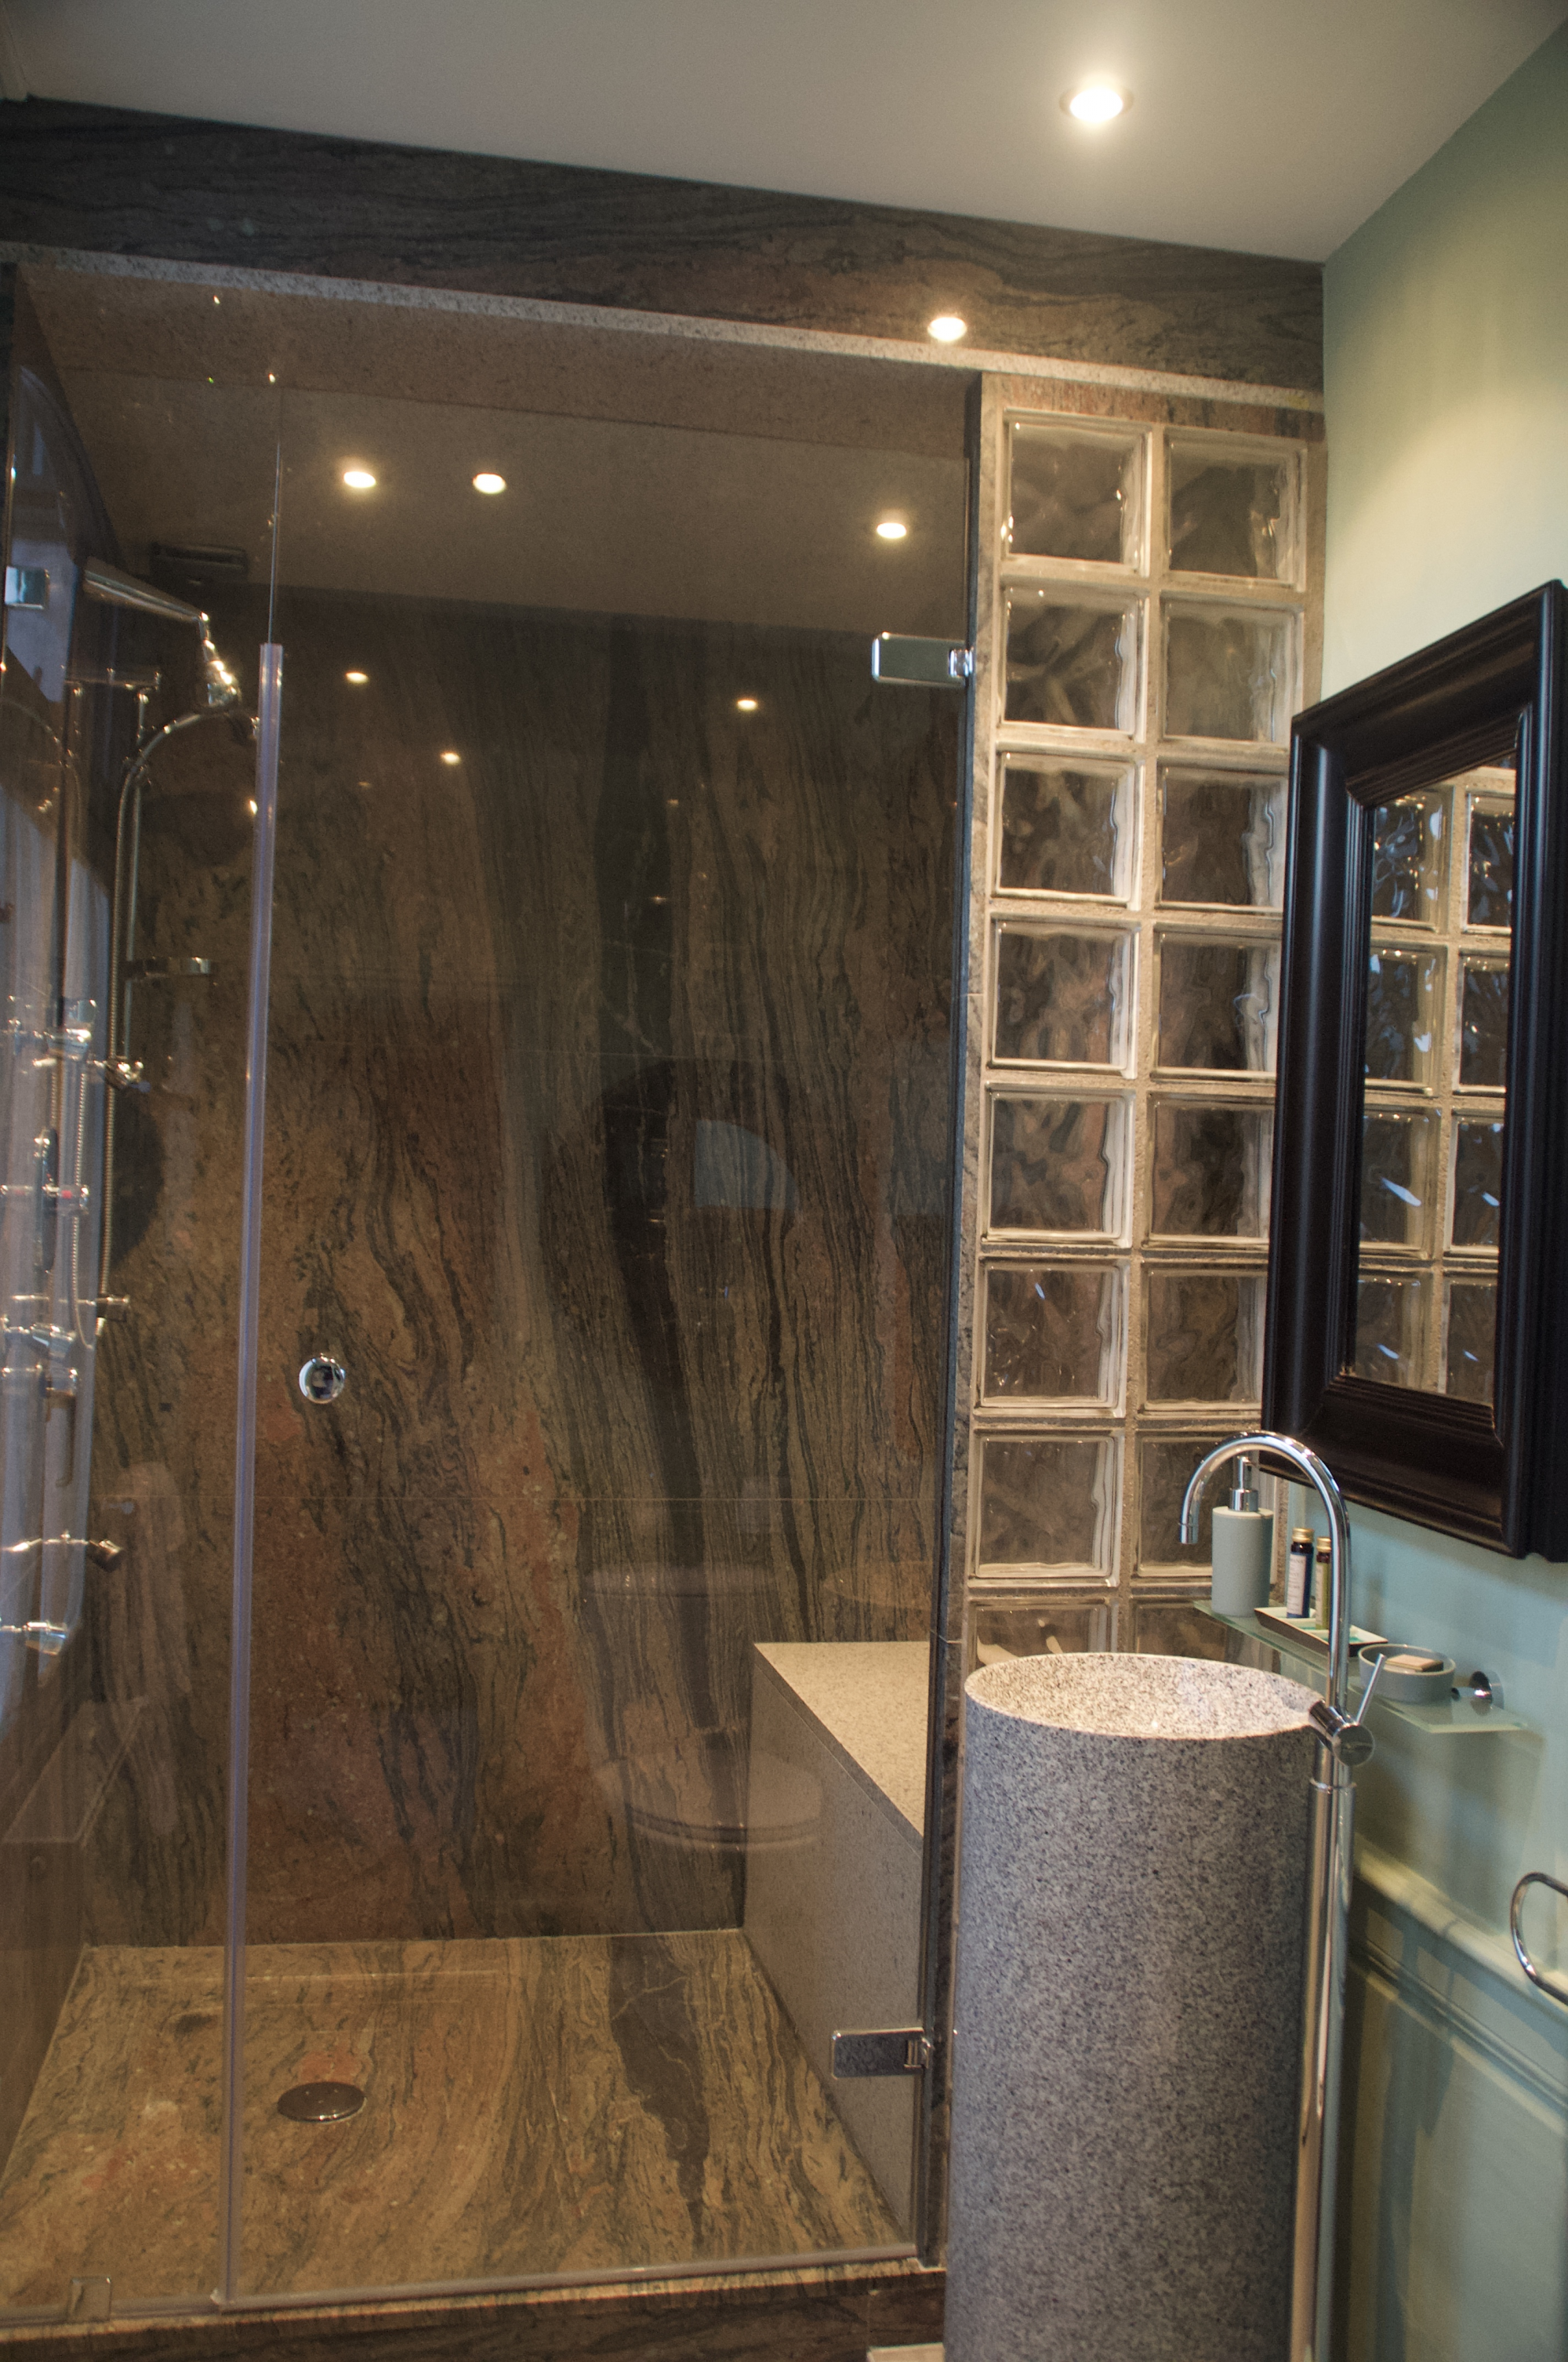 This beautiful granite and glass shower room is located in our Twin suite.